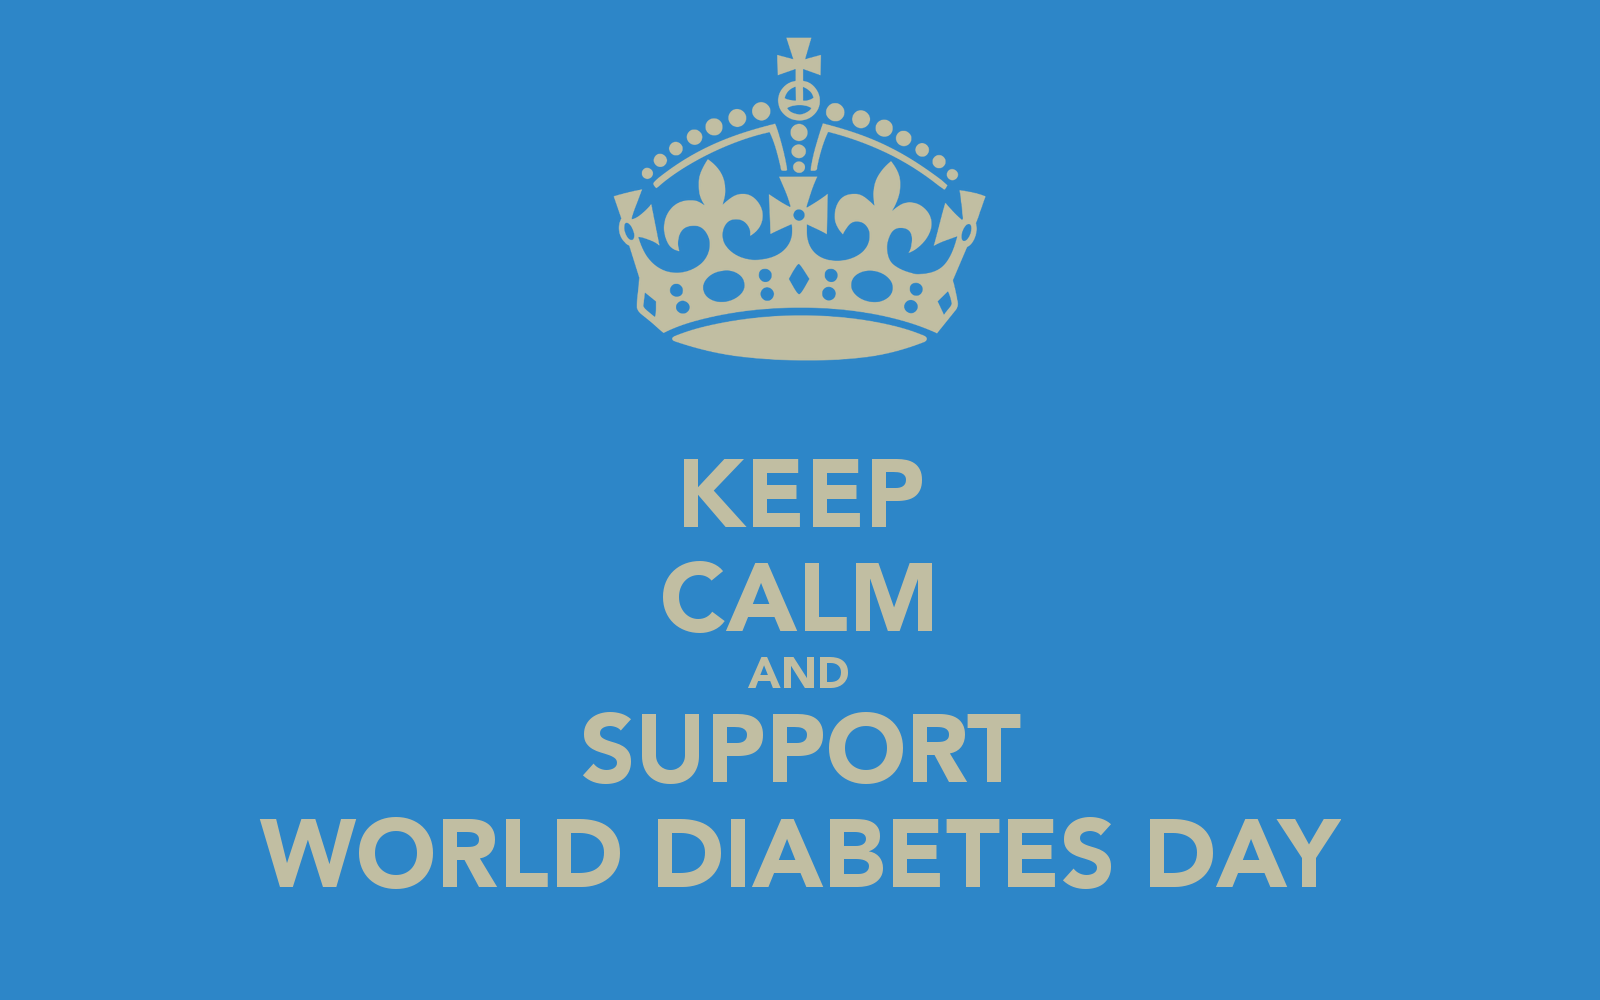 World Diabetes Day of care